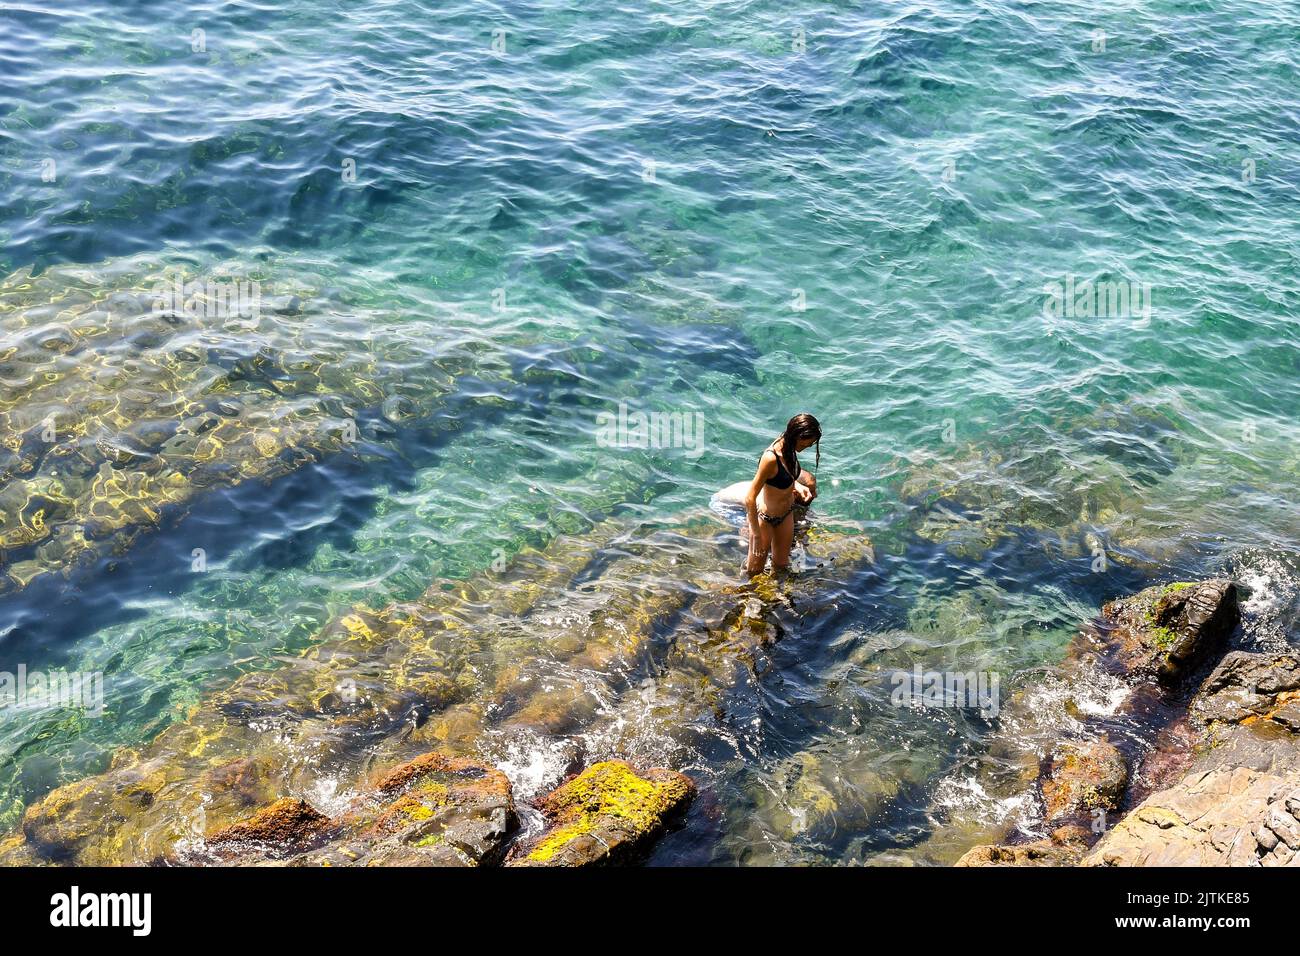 A young woman standing on the rocks of the seashore in summer, Nervi, Genoa, Liguria, Italy Stock Photo